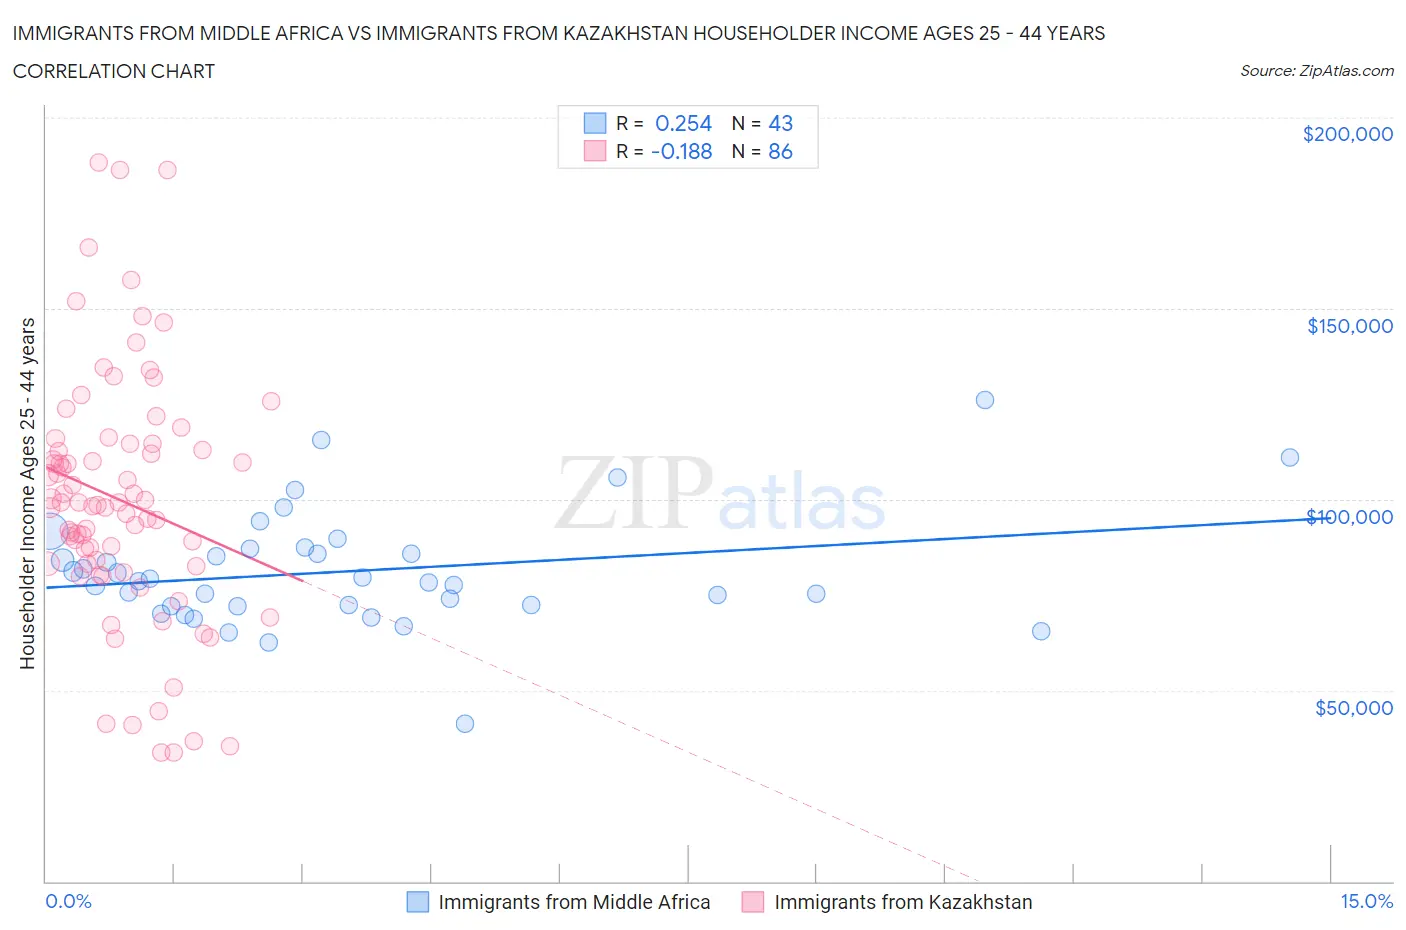 Immigrants from Middle Africa vs Immigrants from Kazakhstan Householder Income Ages 25 - 44 years